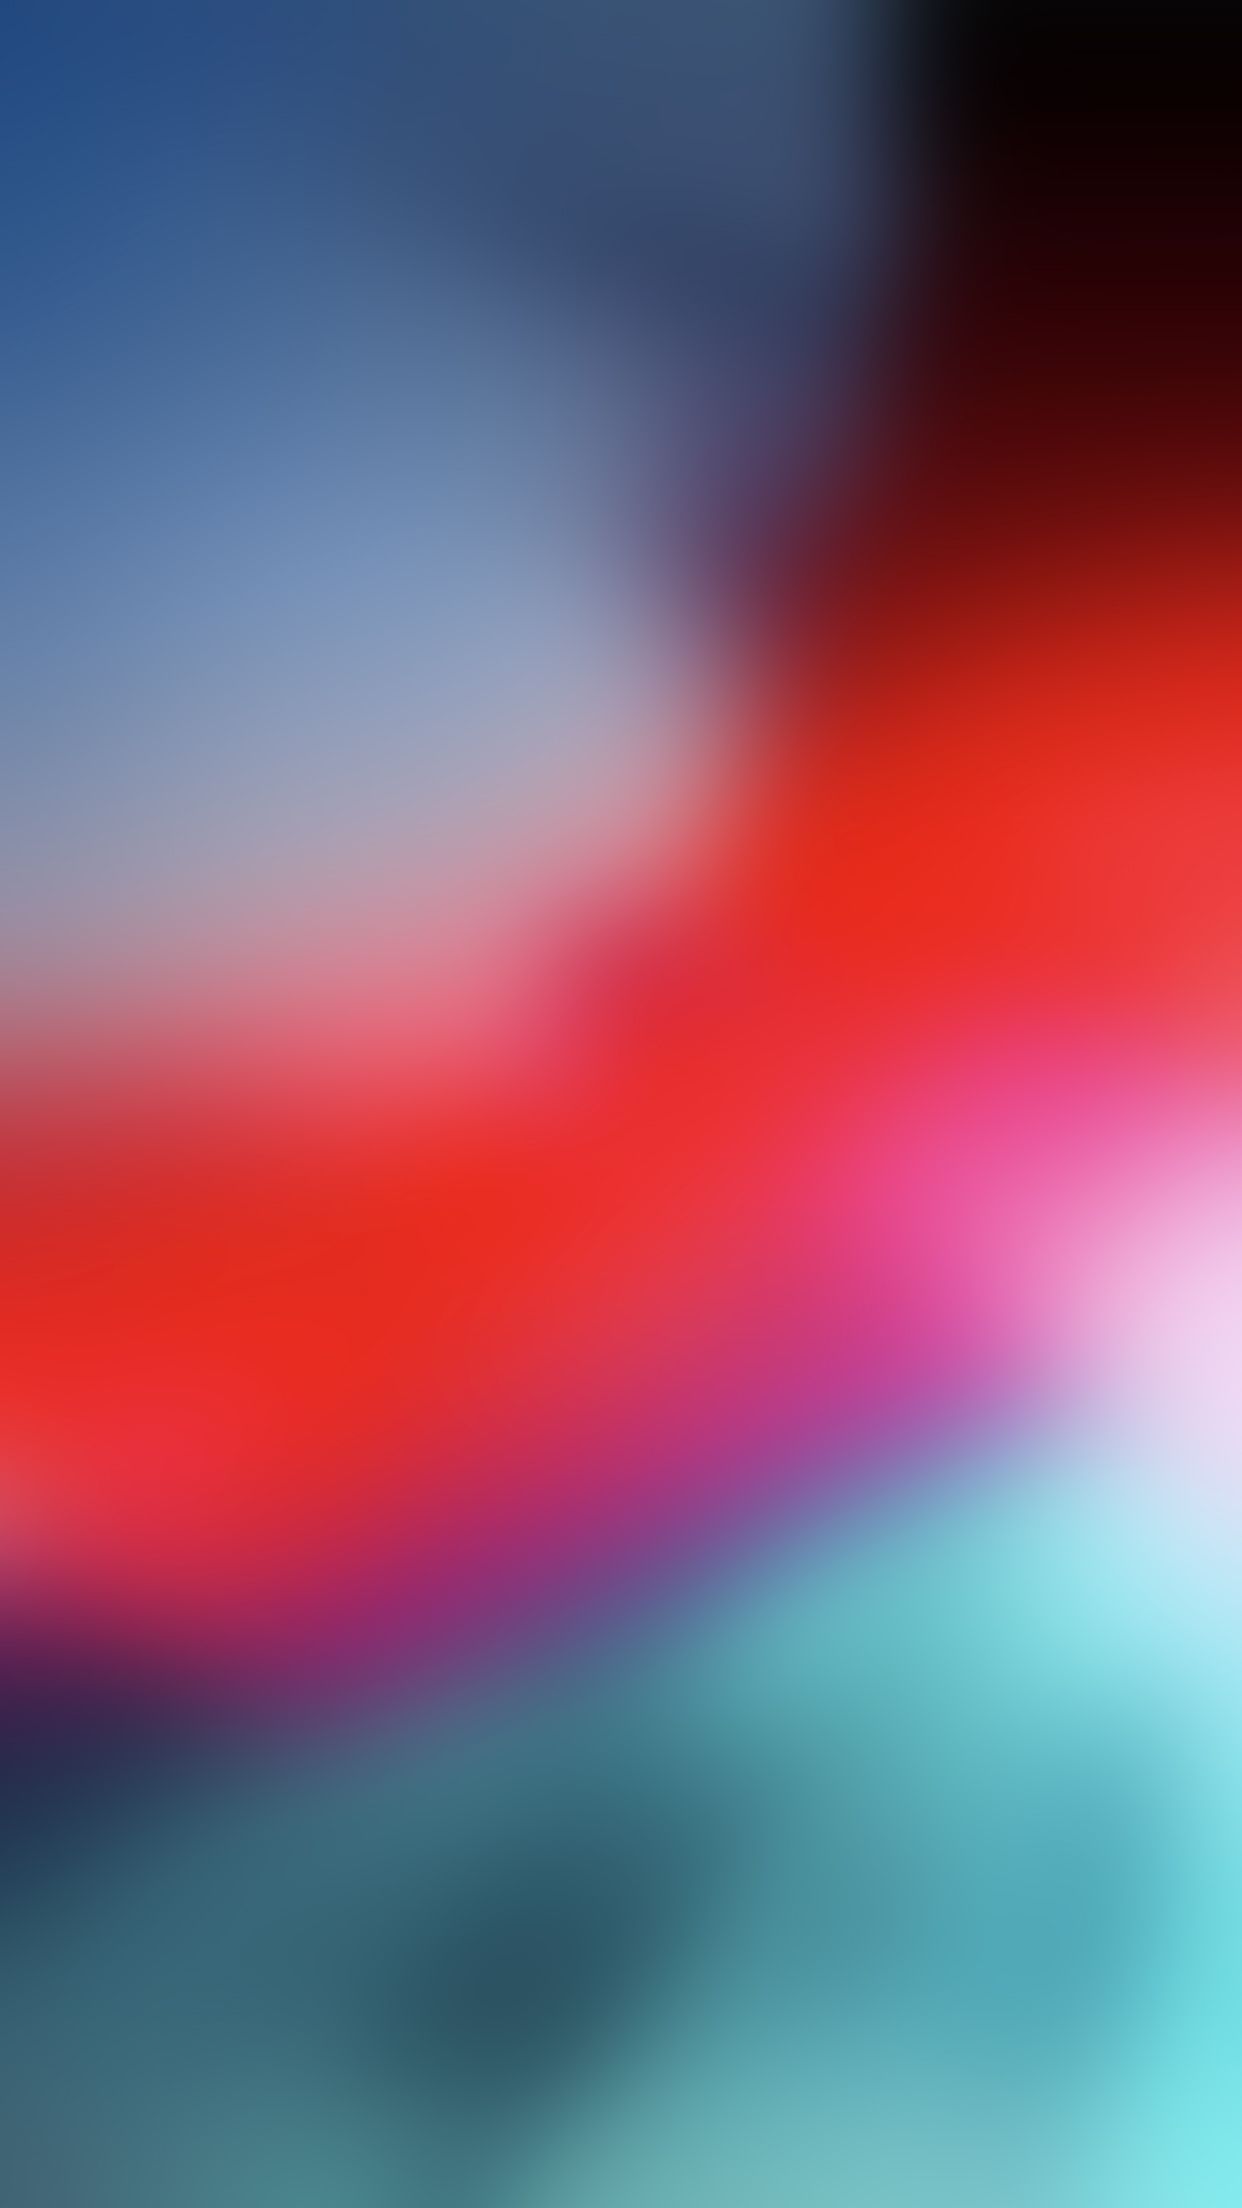 Free download Blur Wallpapers on [1242x2208] for your Desktop, Mobile &  Tablet | Explore 11+ Blurred iPhone Wallpapers | Gundam iPhone Wallpaper,  Watchmen Wallpaper iPhone, NASA iPhone Wallpaper